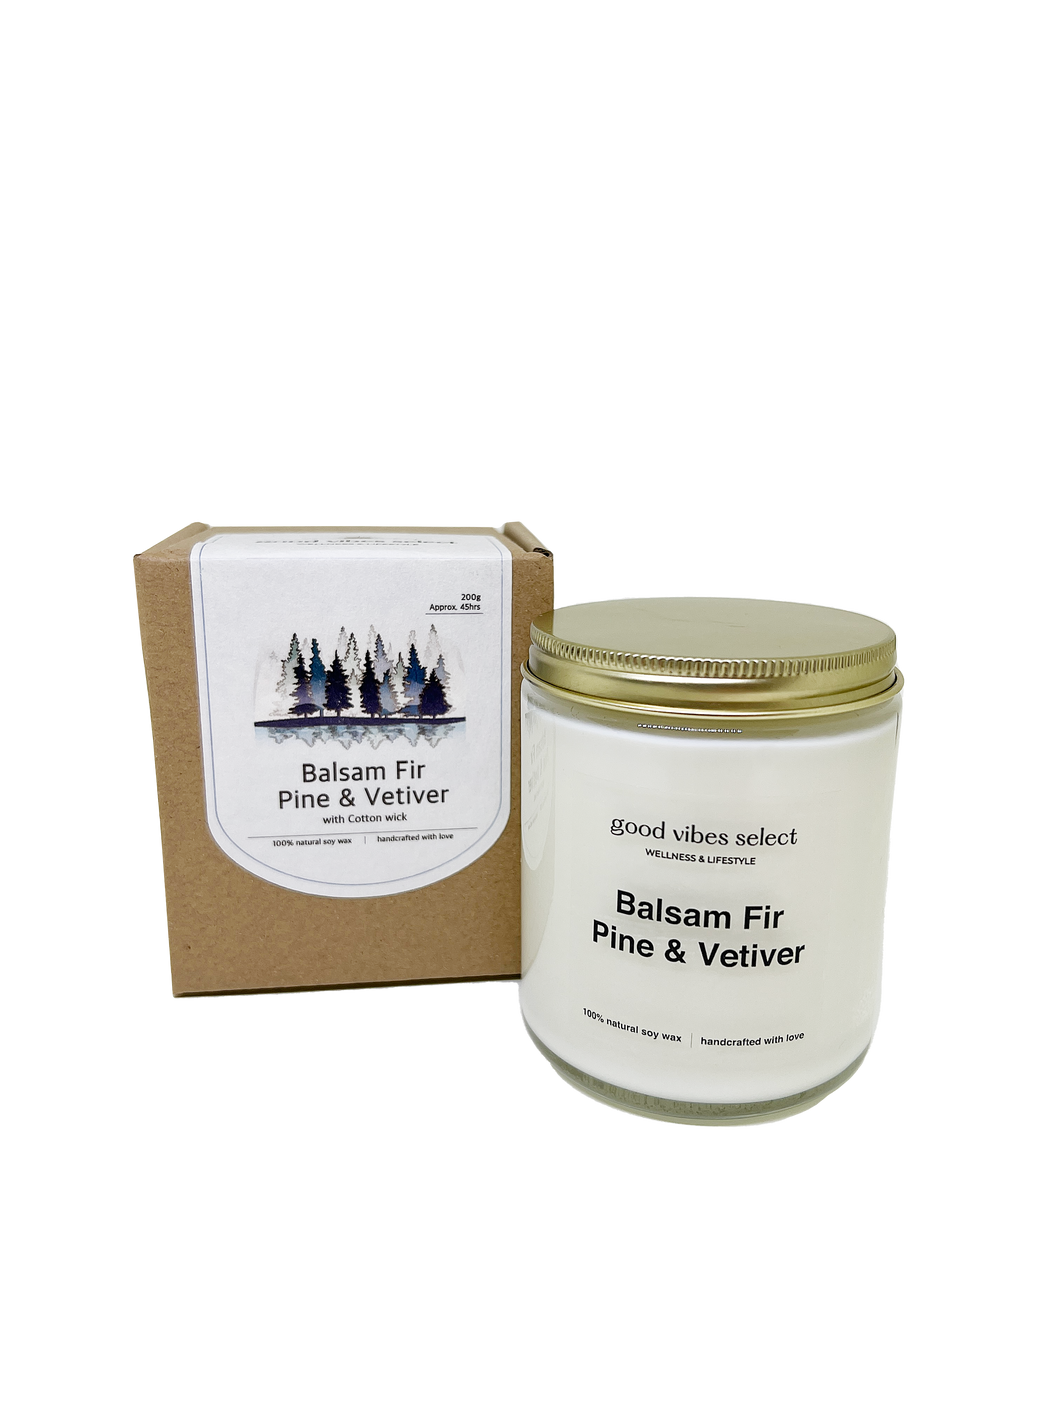 Good Vibes Select Scented Candle - Nordic Forest